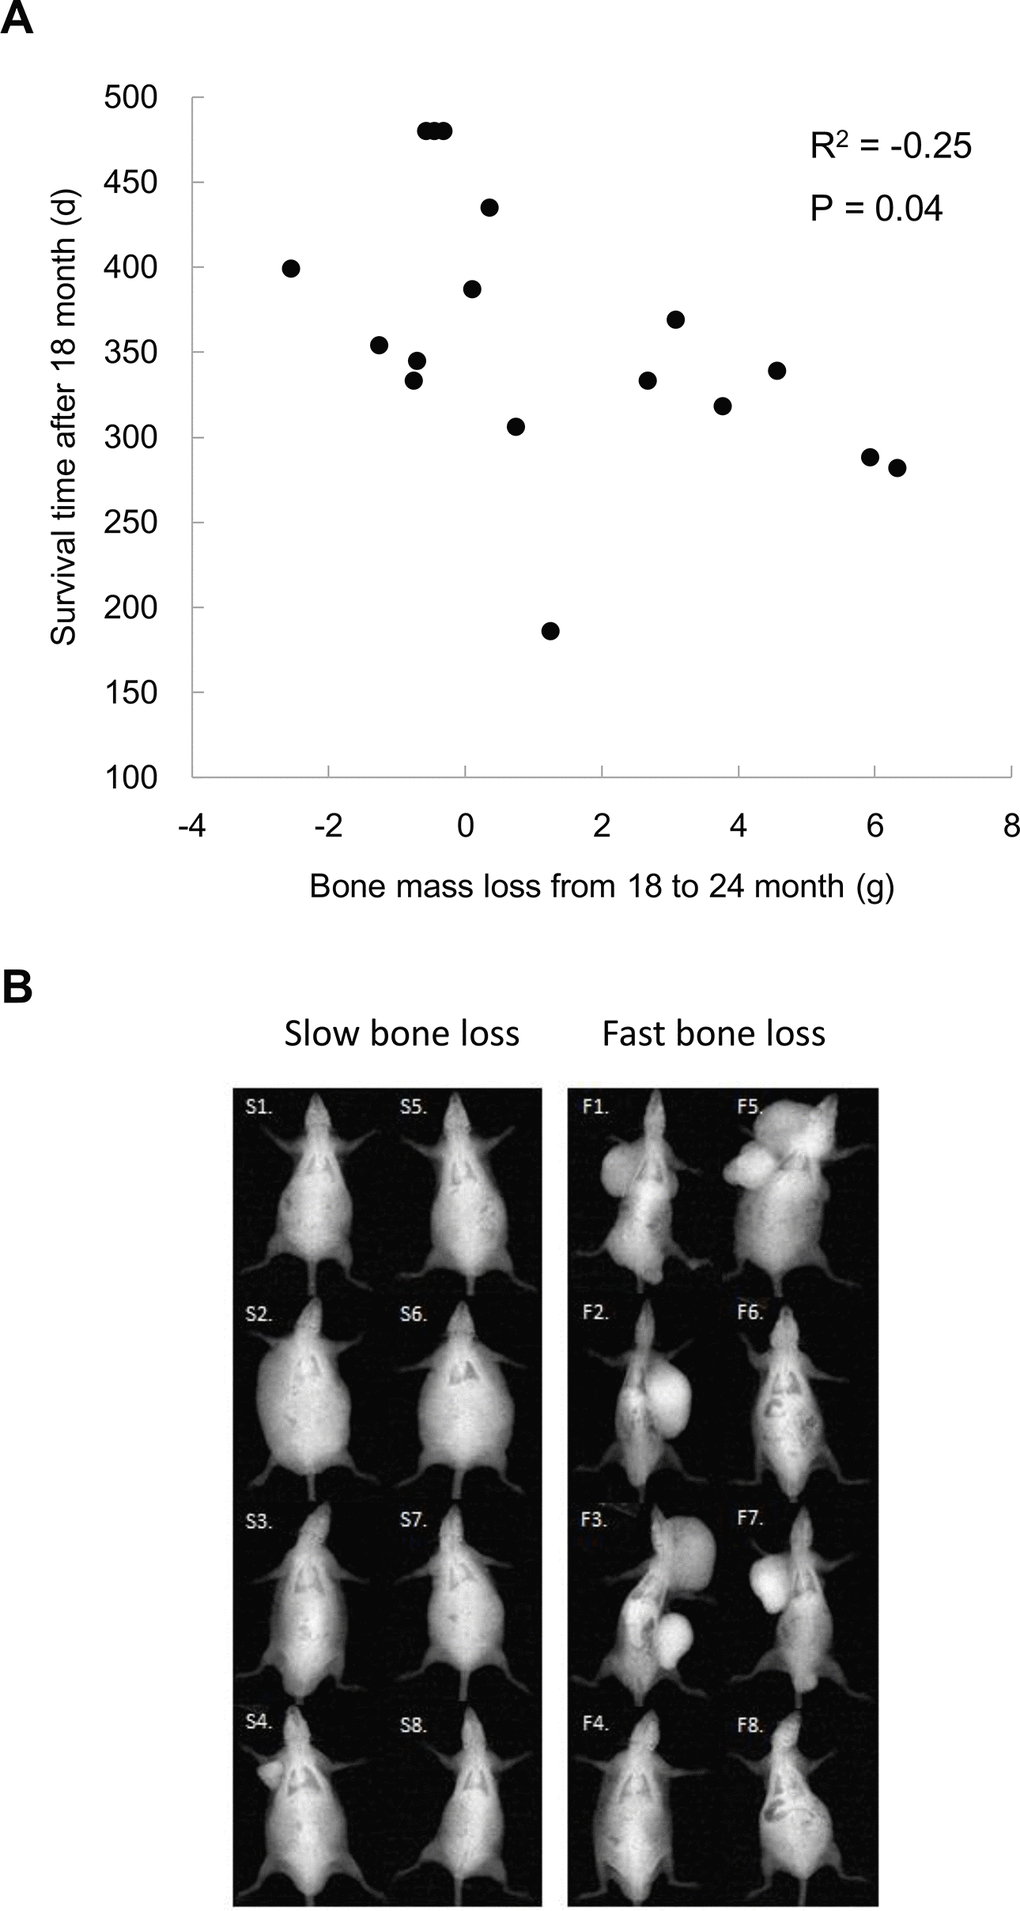 Bone mass loss is associated with tumor occurrence and residual survival time after 18 months of age (A). Lower panel shows x-ray images of the top 8 and bottom 8 rats (N = 17) on magnitudes of bone mass loss among rats survived after 18 months (B), demonstrating a severe increased tumorigenesis together with cachexia.